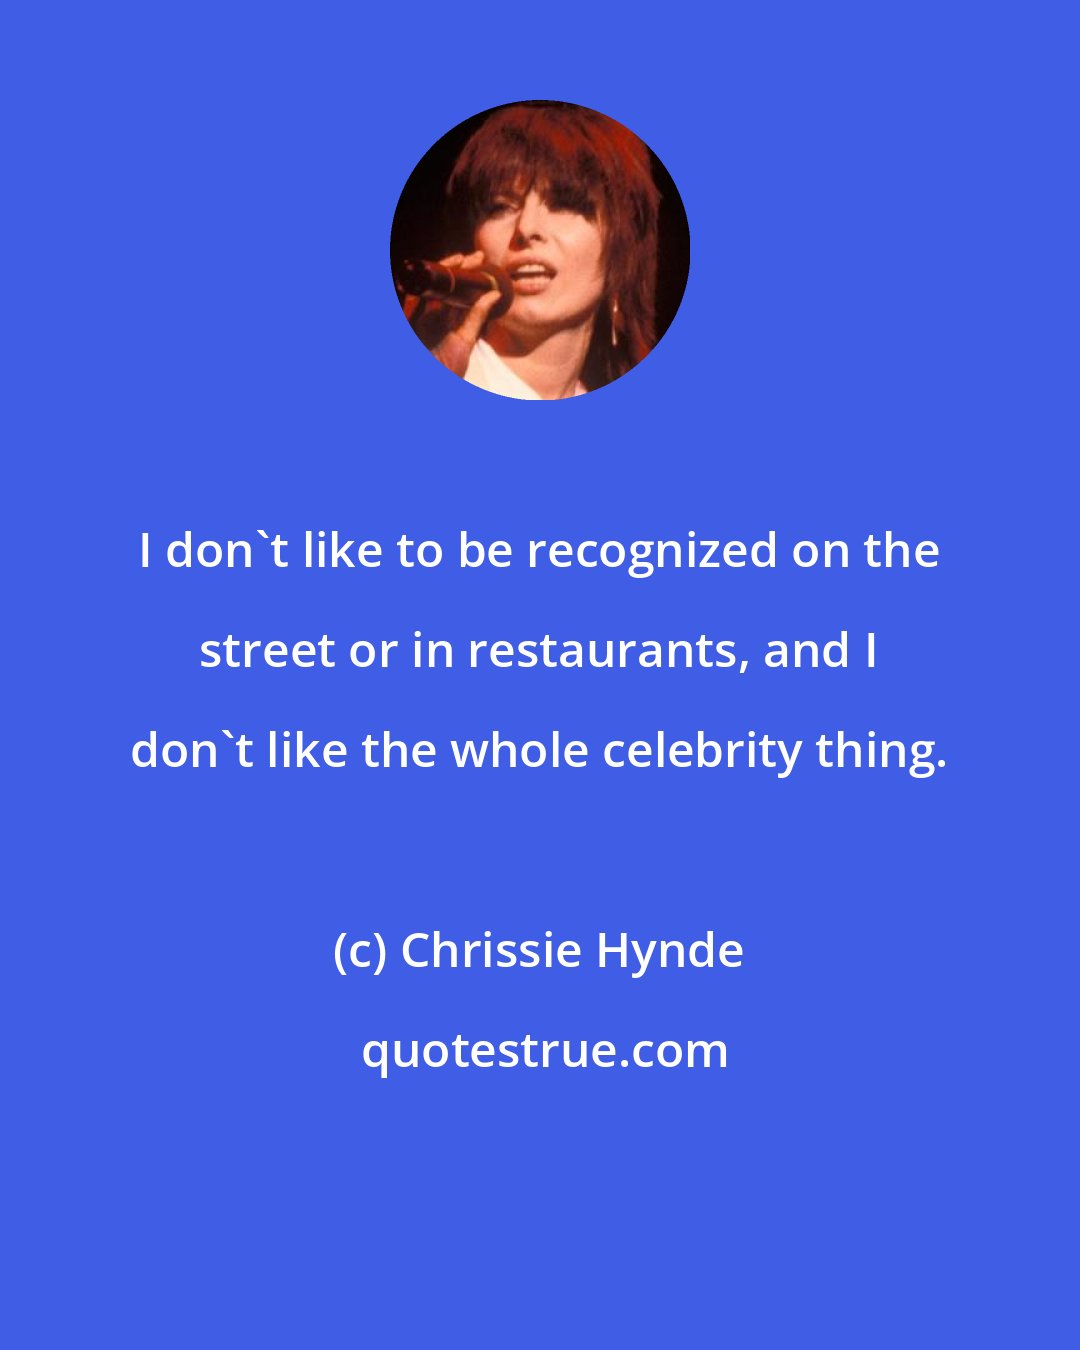 Chrissie Hynde: I don't like to be recognized on the street or in restaurants, and I don't like the whole celebrity thing.